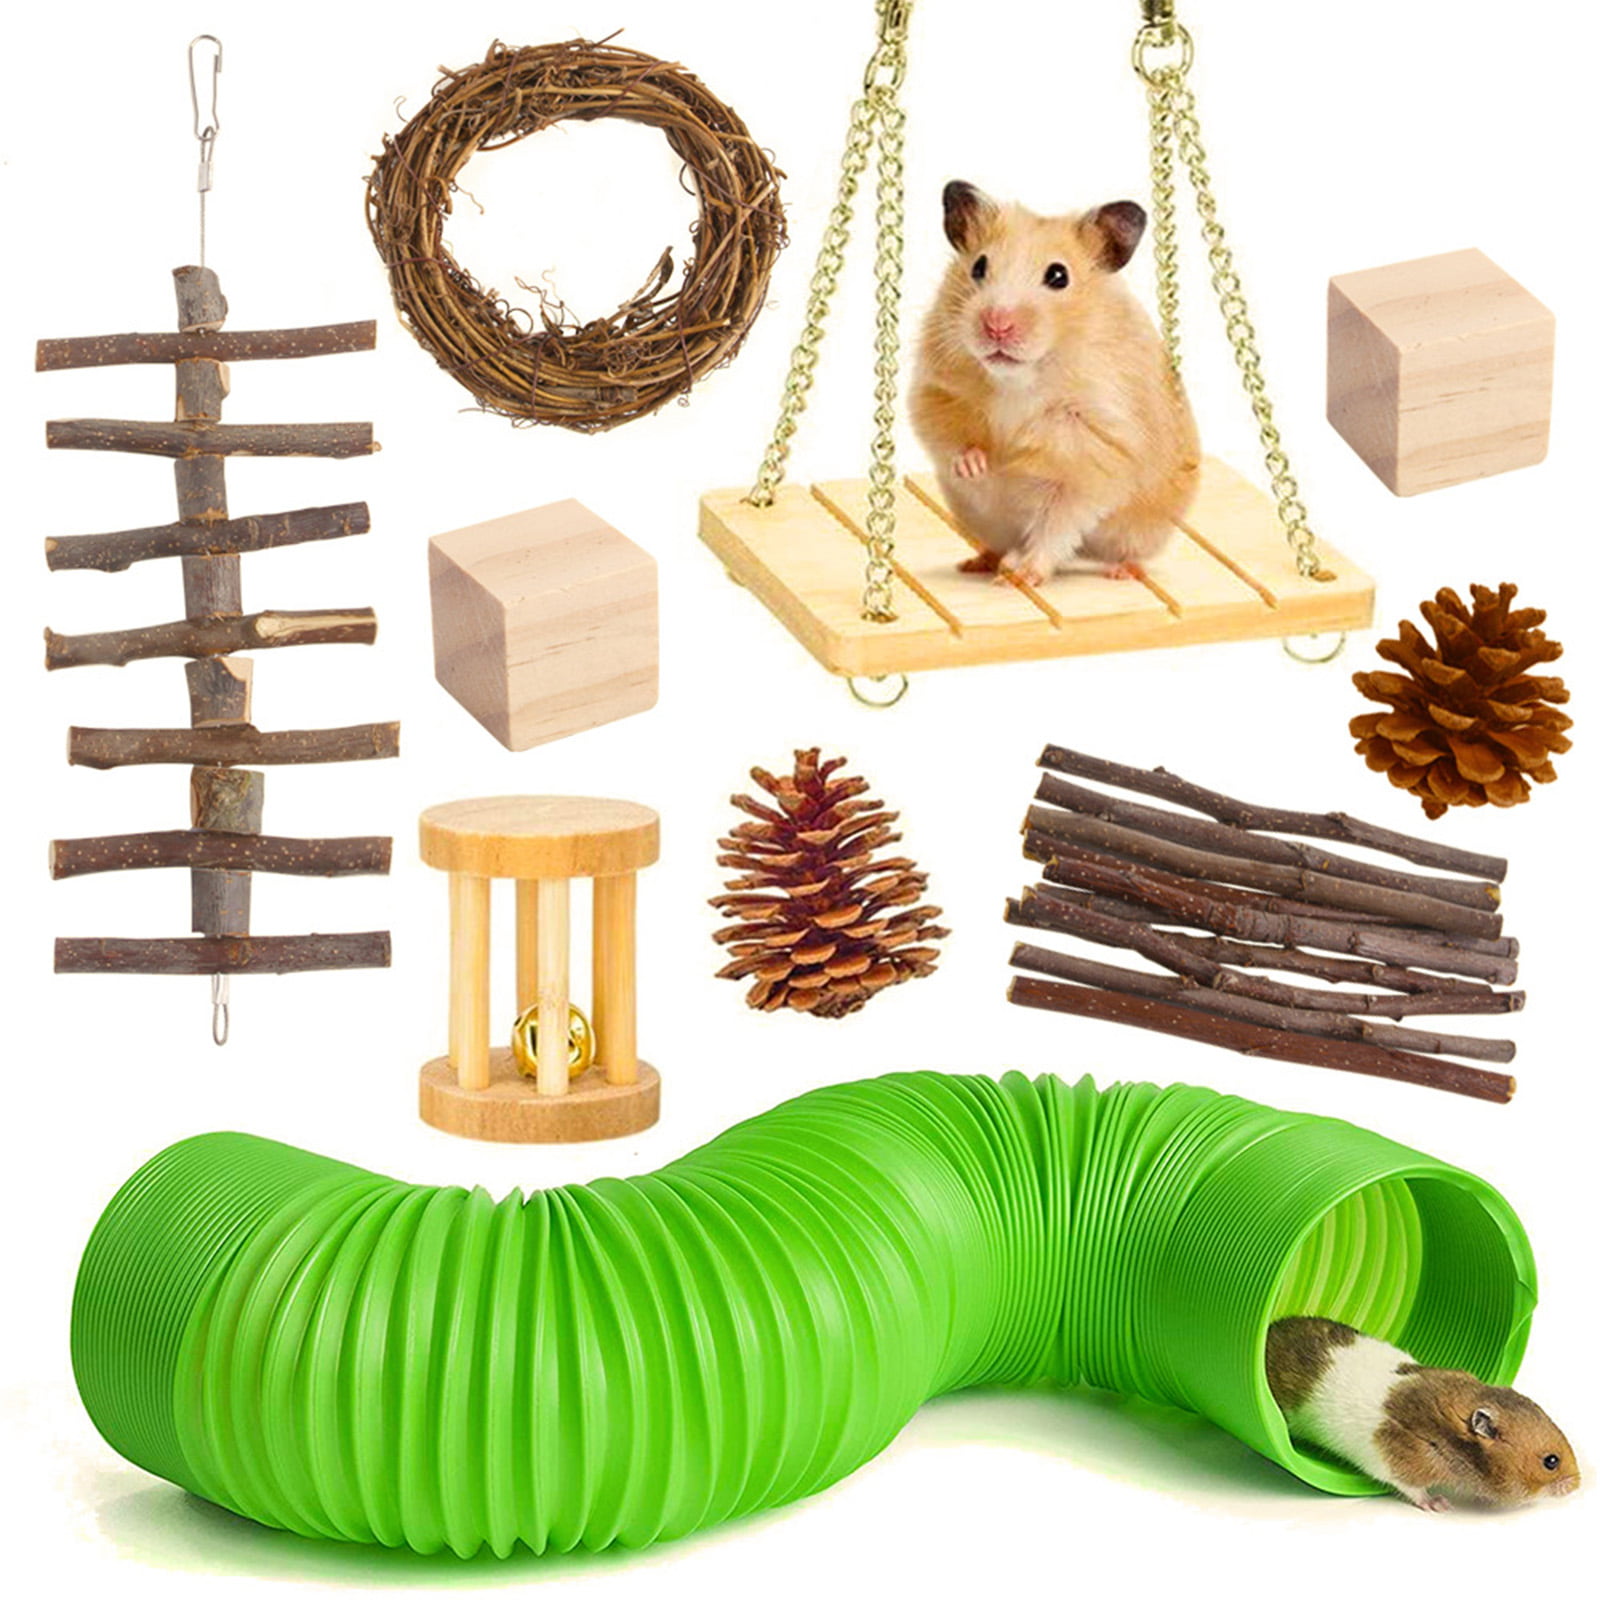 7. Hamster Molar Toys Made of Apple or Pear Wood